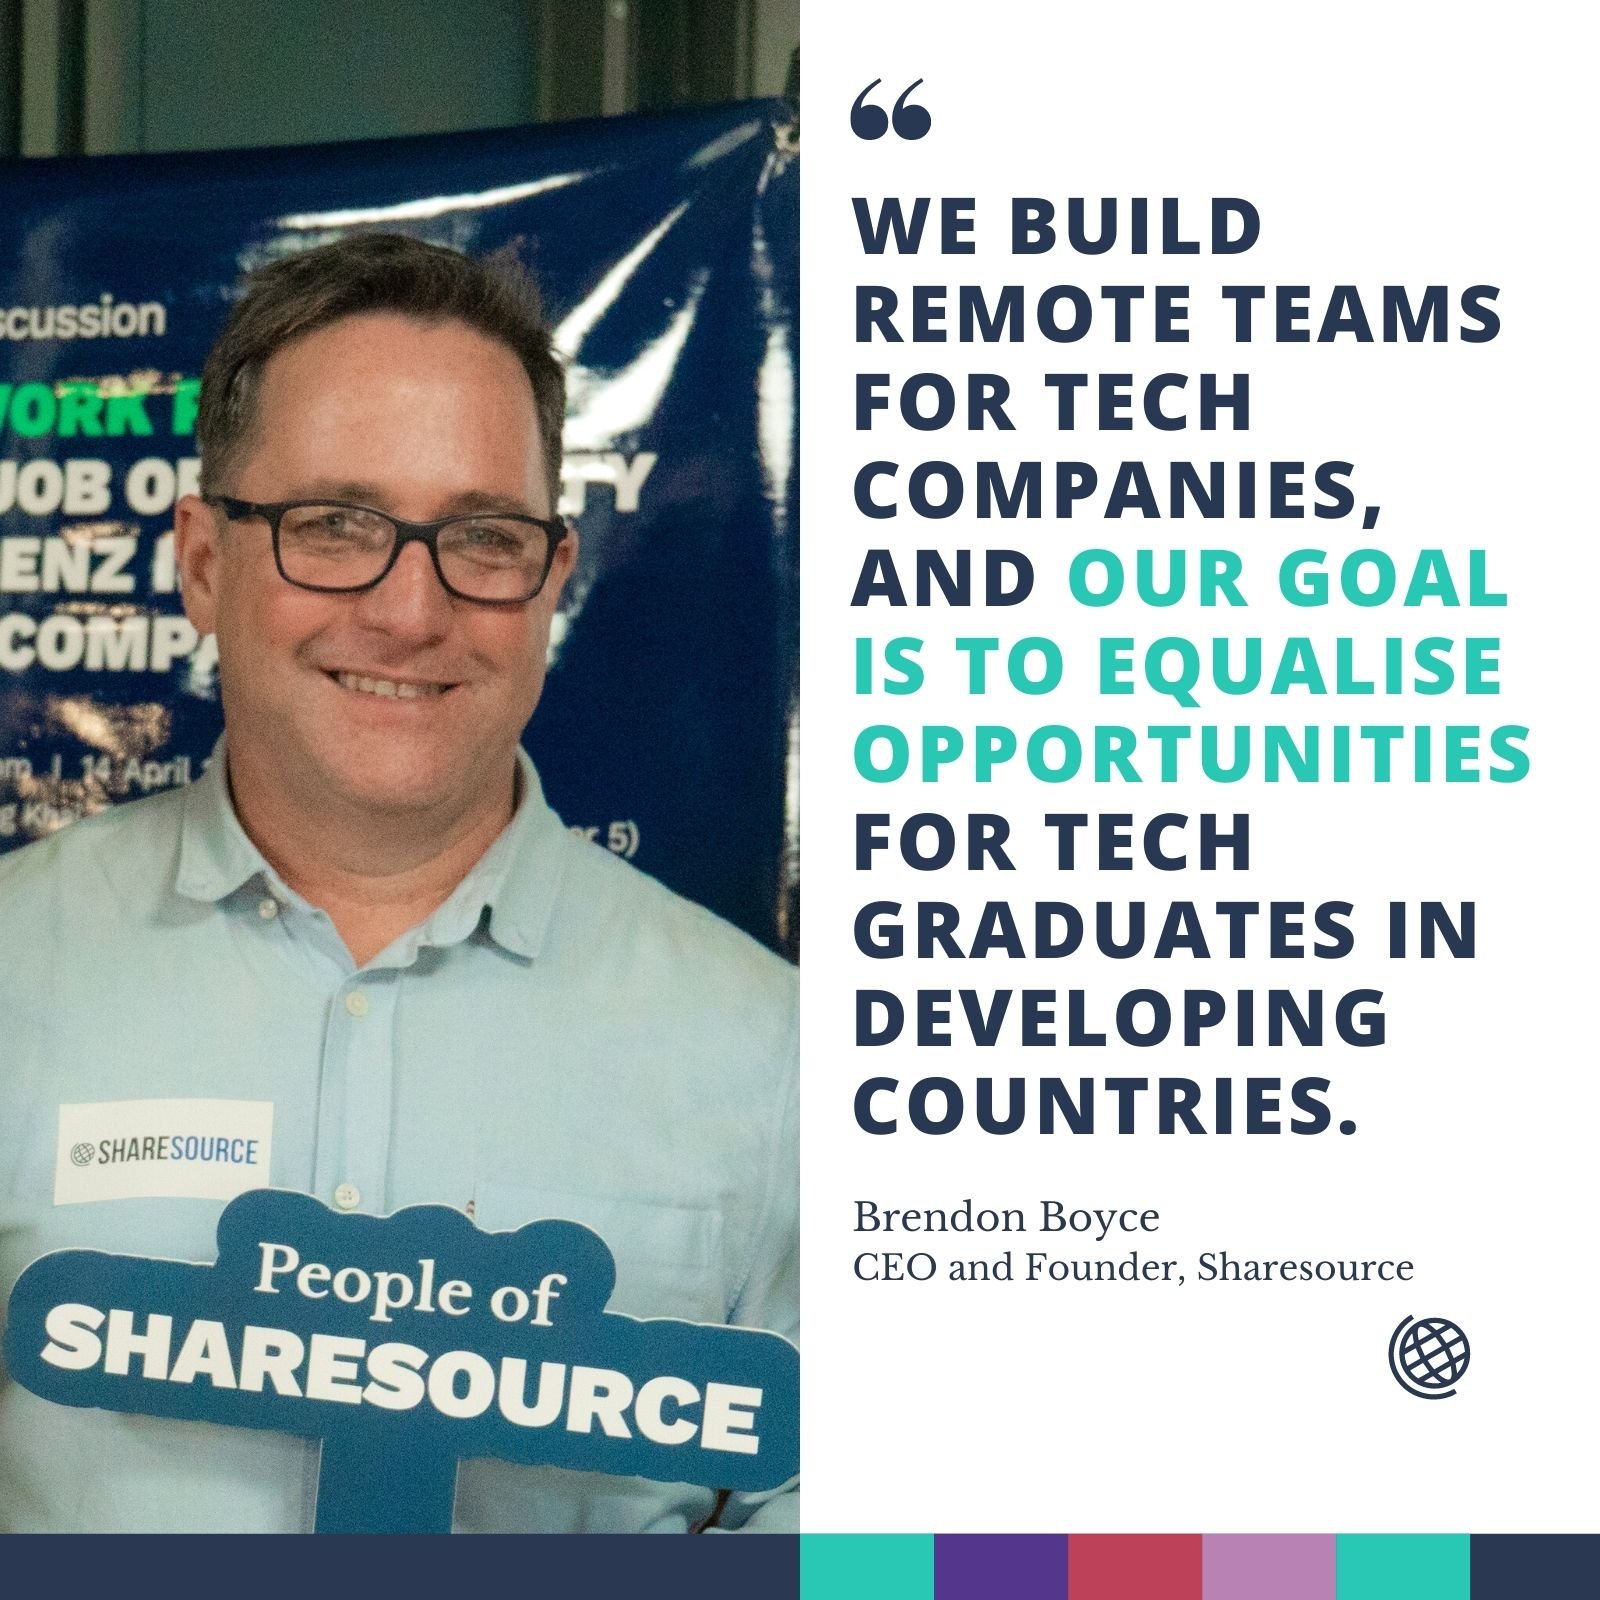 Brendon Boyce, CEO and Founder of Sharesource